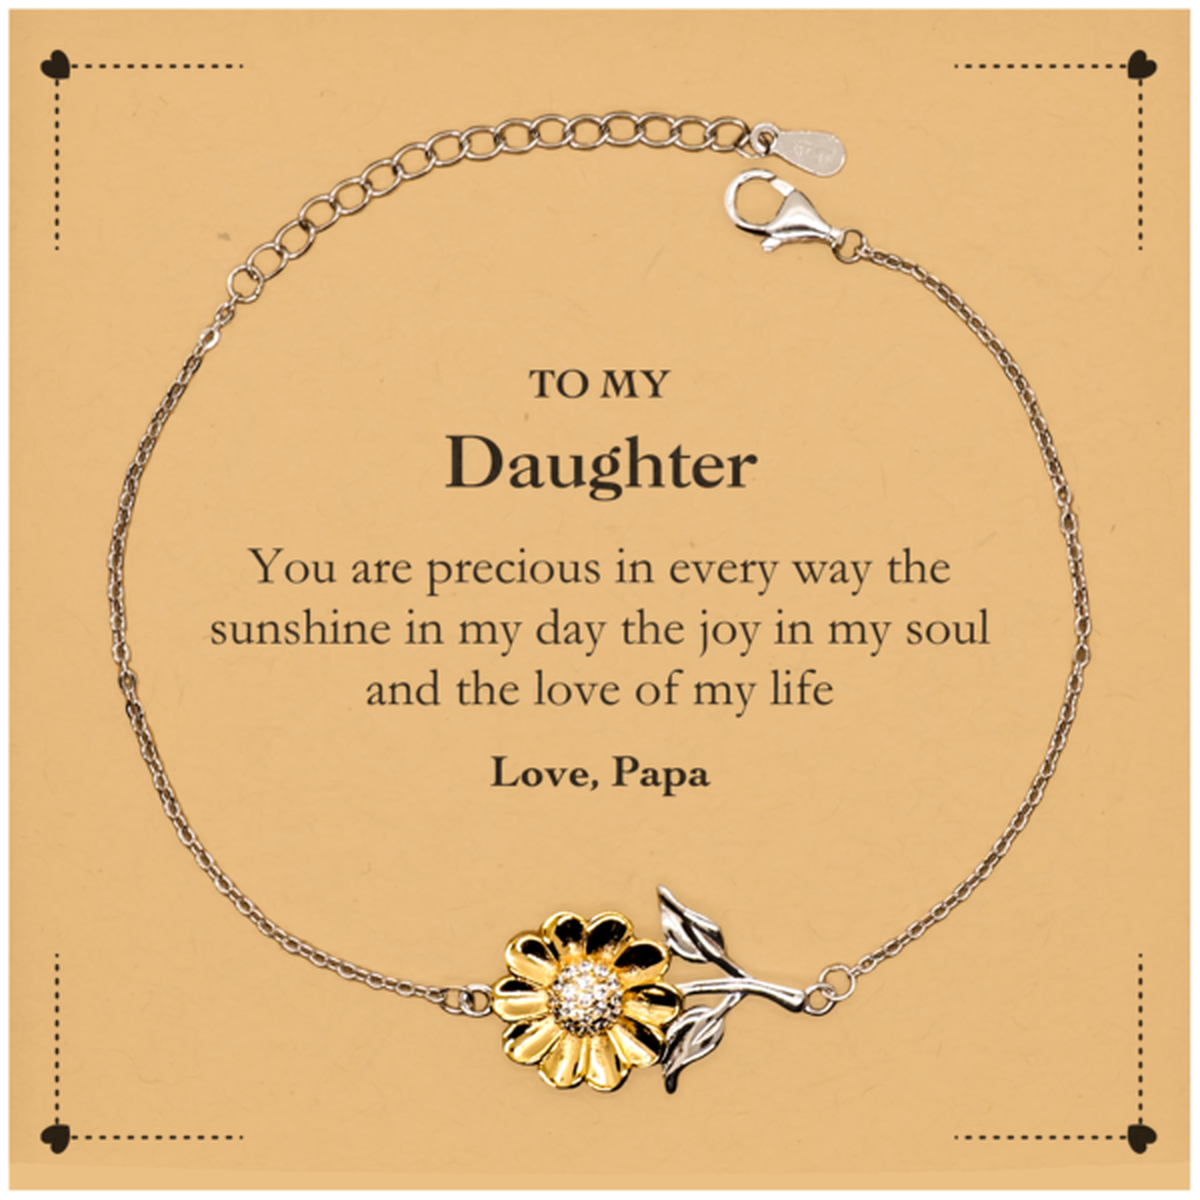 Graduation Gifts for Daughter Sunflower Bracelet Present from Papa, Christmas Daughter Birthday Gifts Daughter You are precious in every way the sunshine in my day. Love, Papa